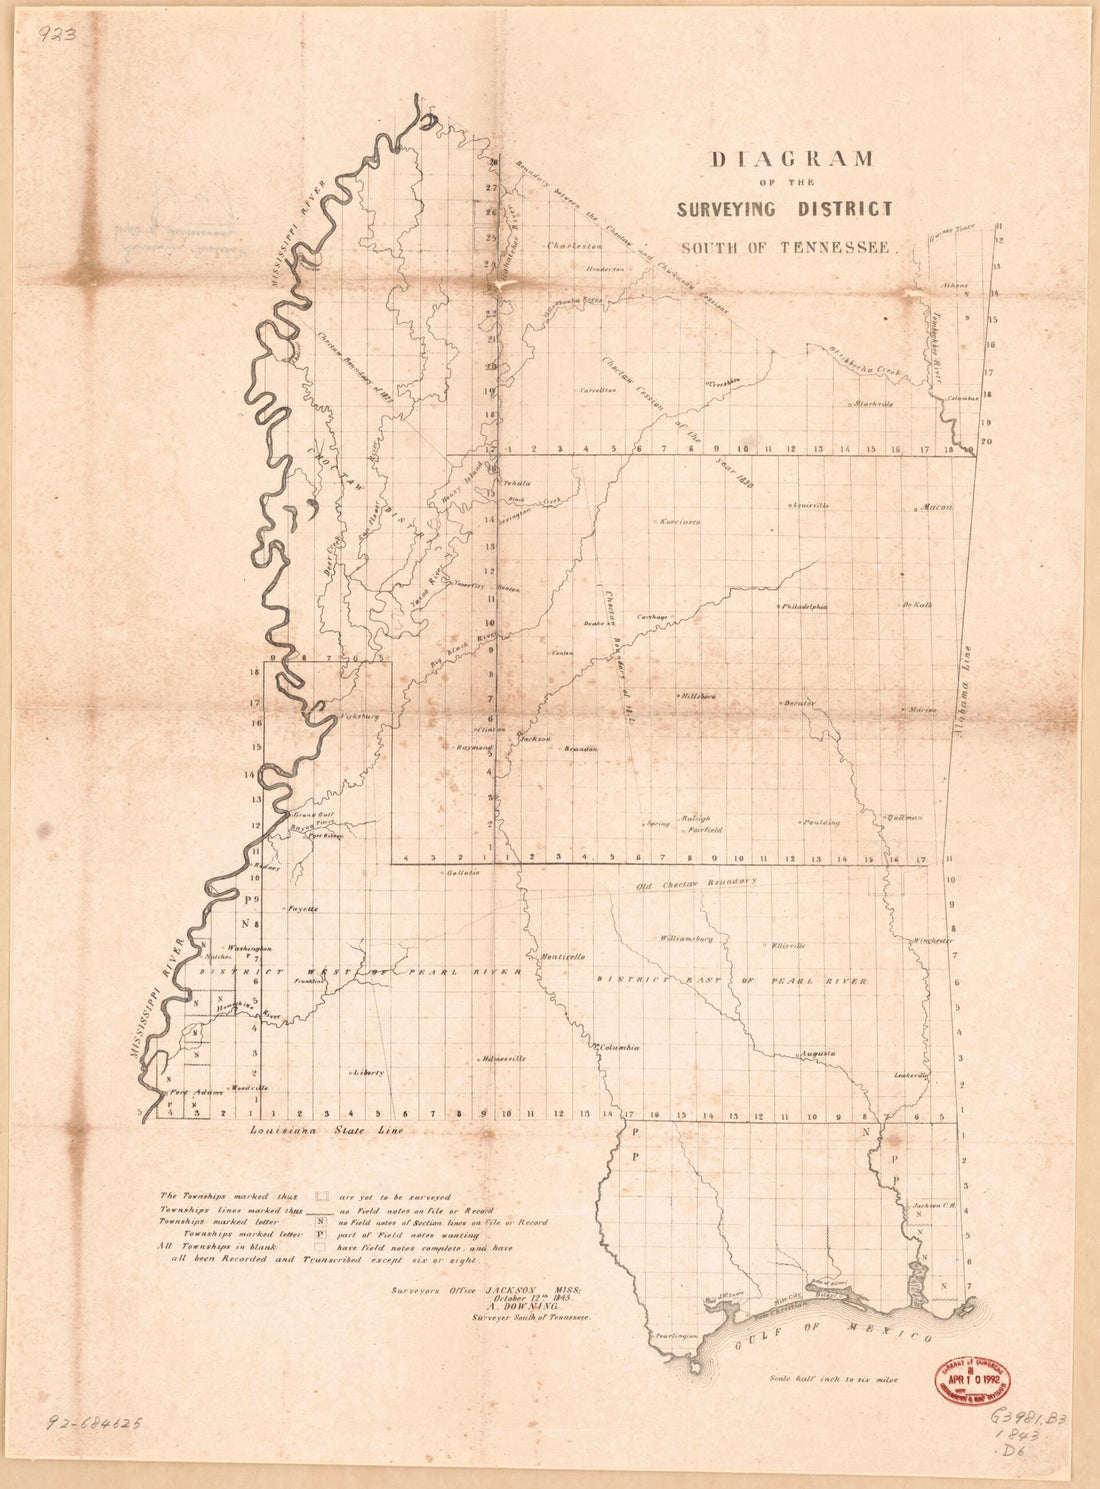 This old map of Diagram of the Surveying District, South of Tennessee : Mississippi from 1843 was created by A. Downing in 1843